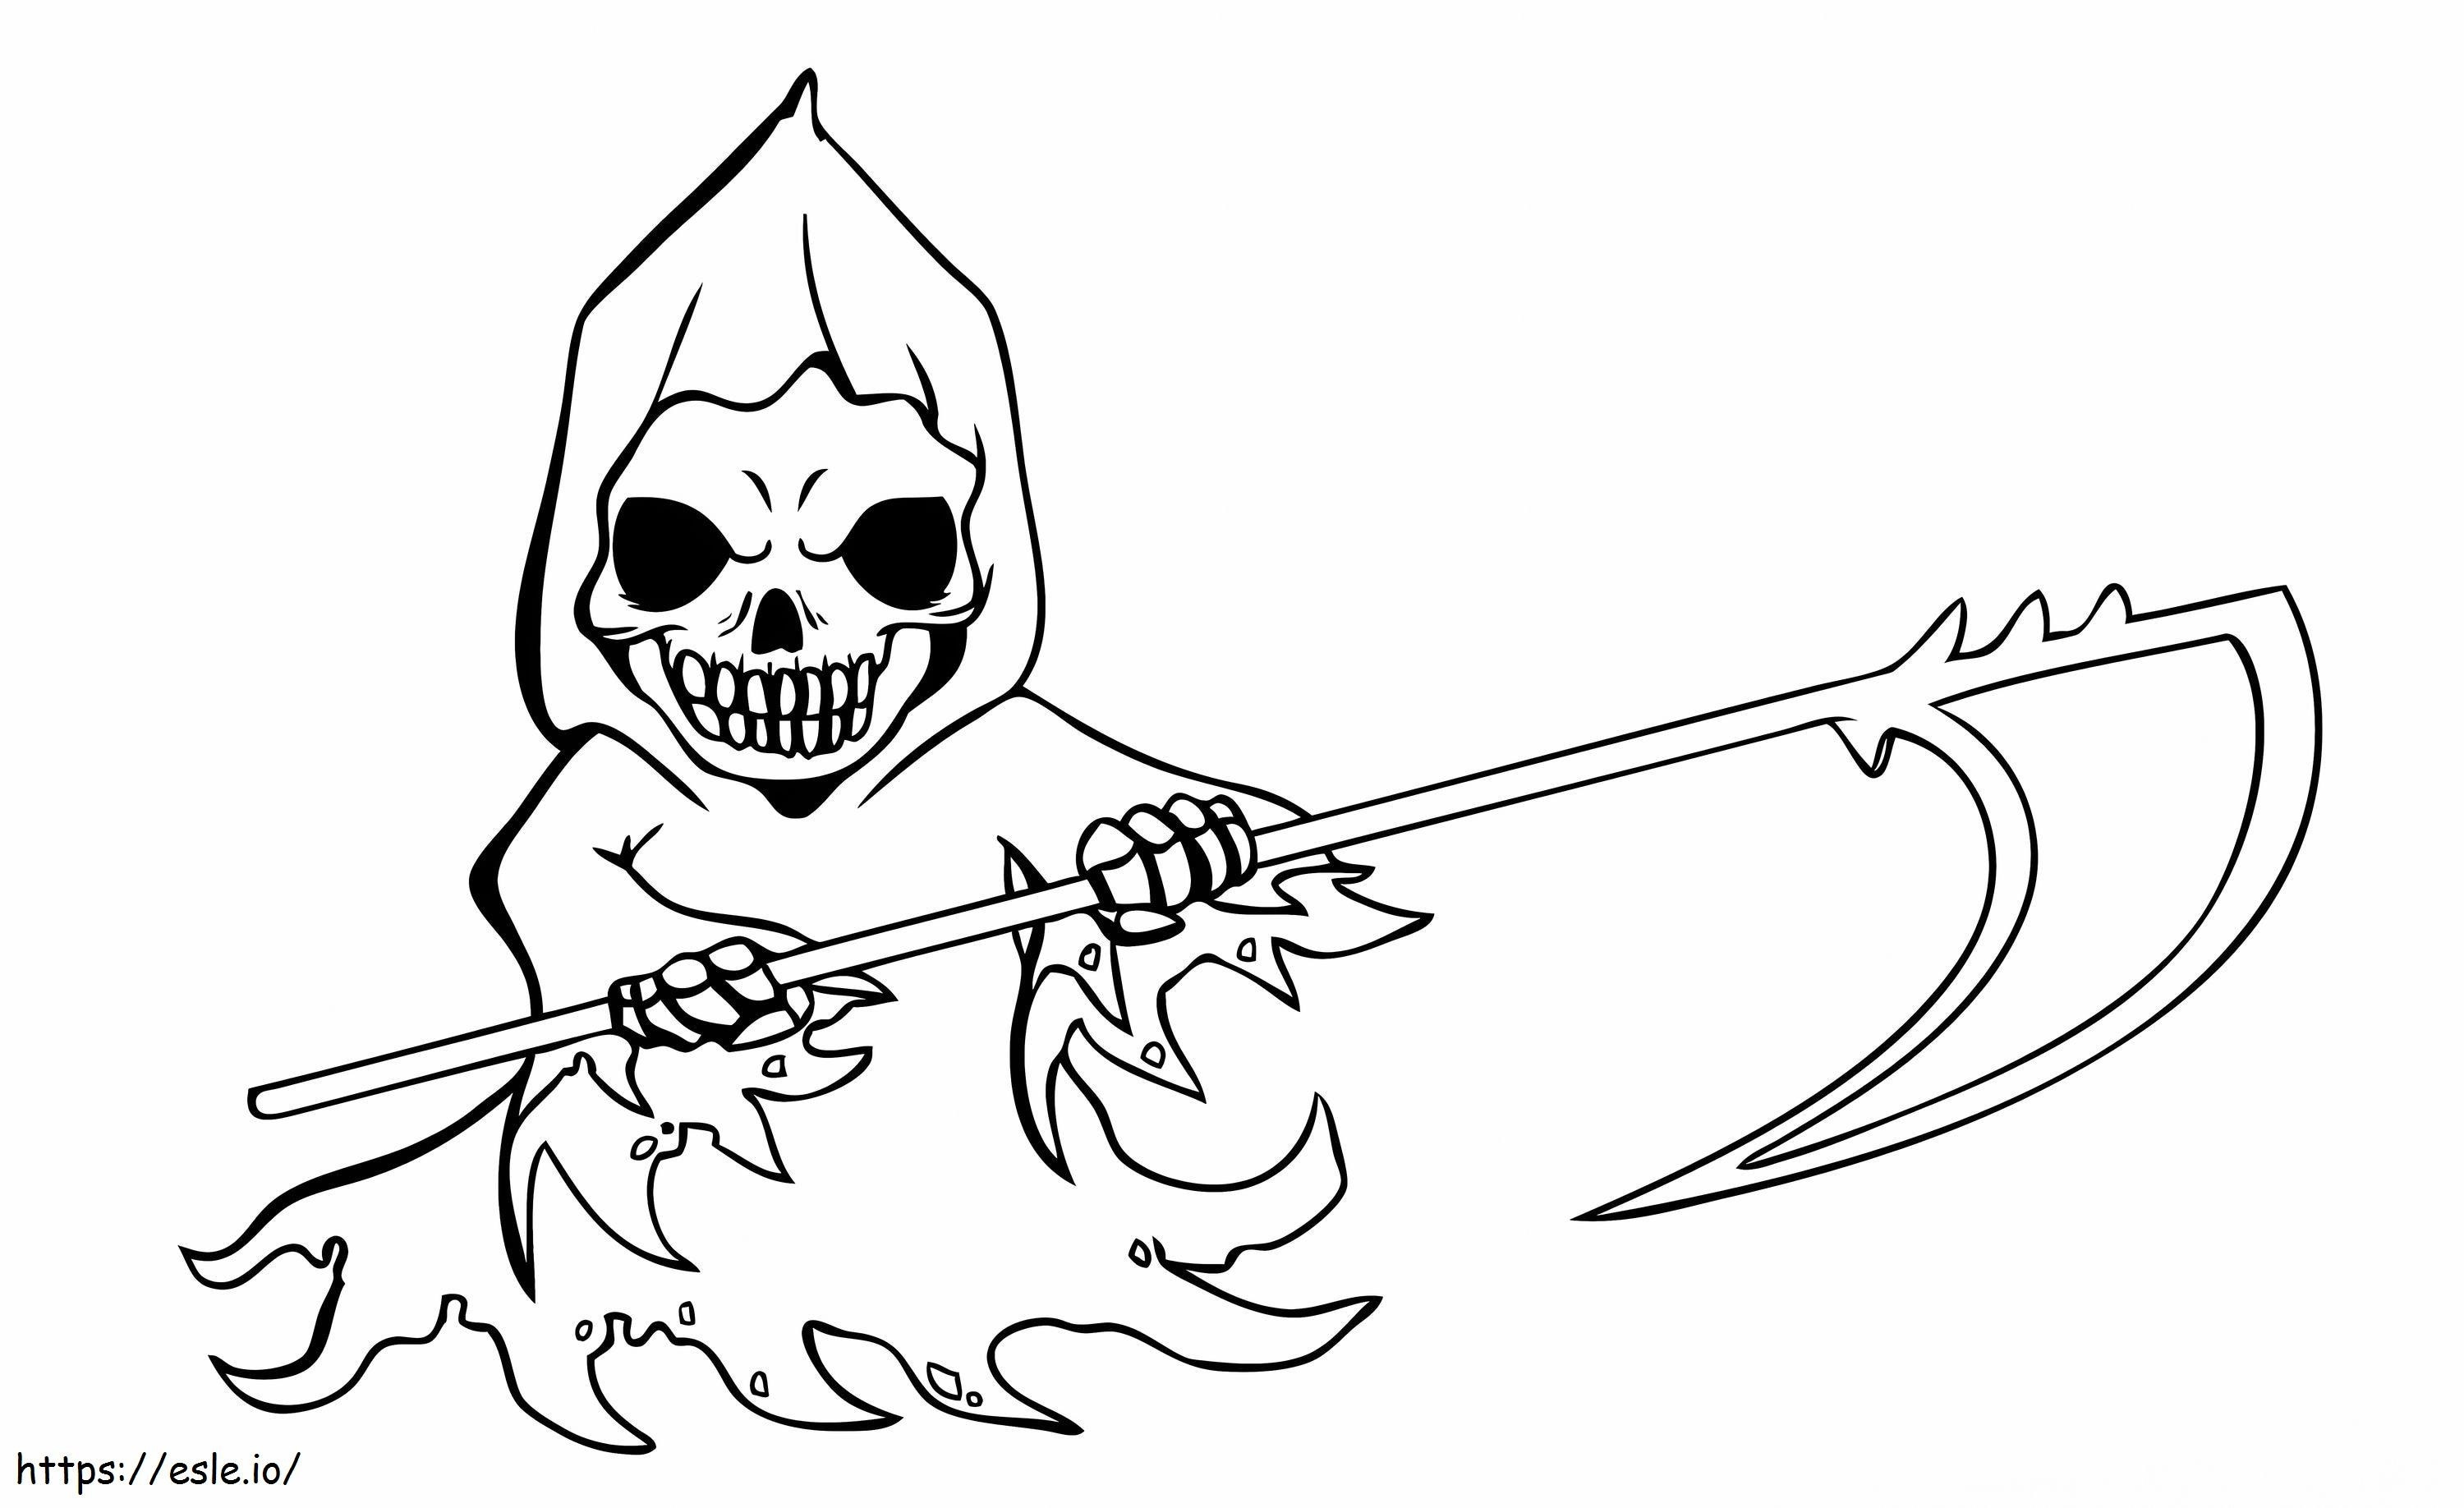 Grim Reaper 4 coloring page